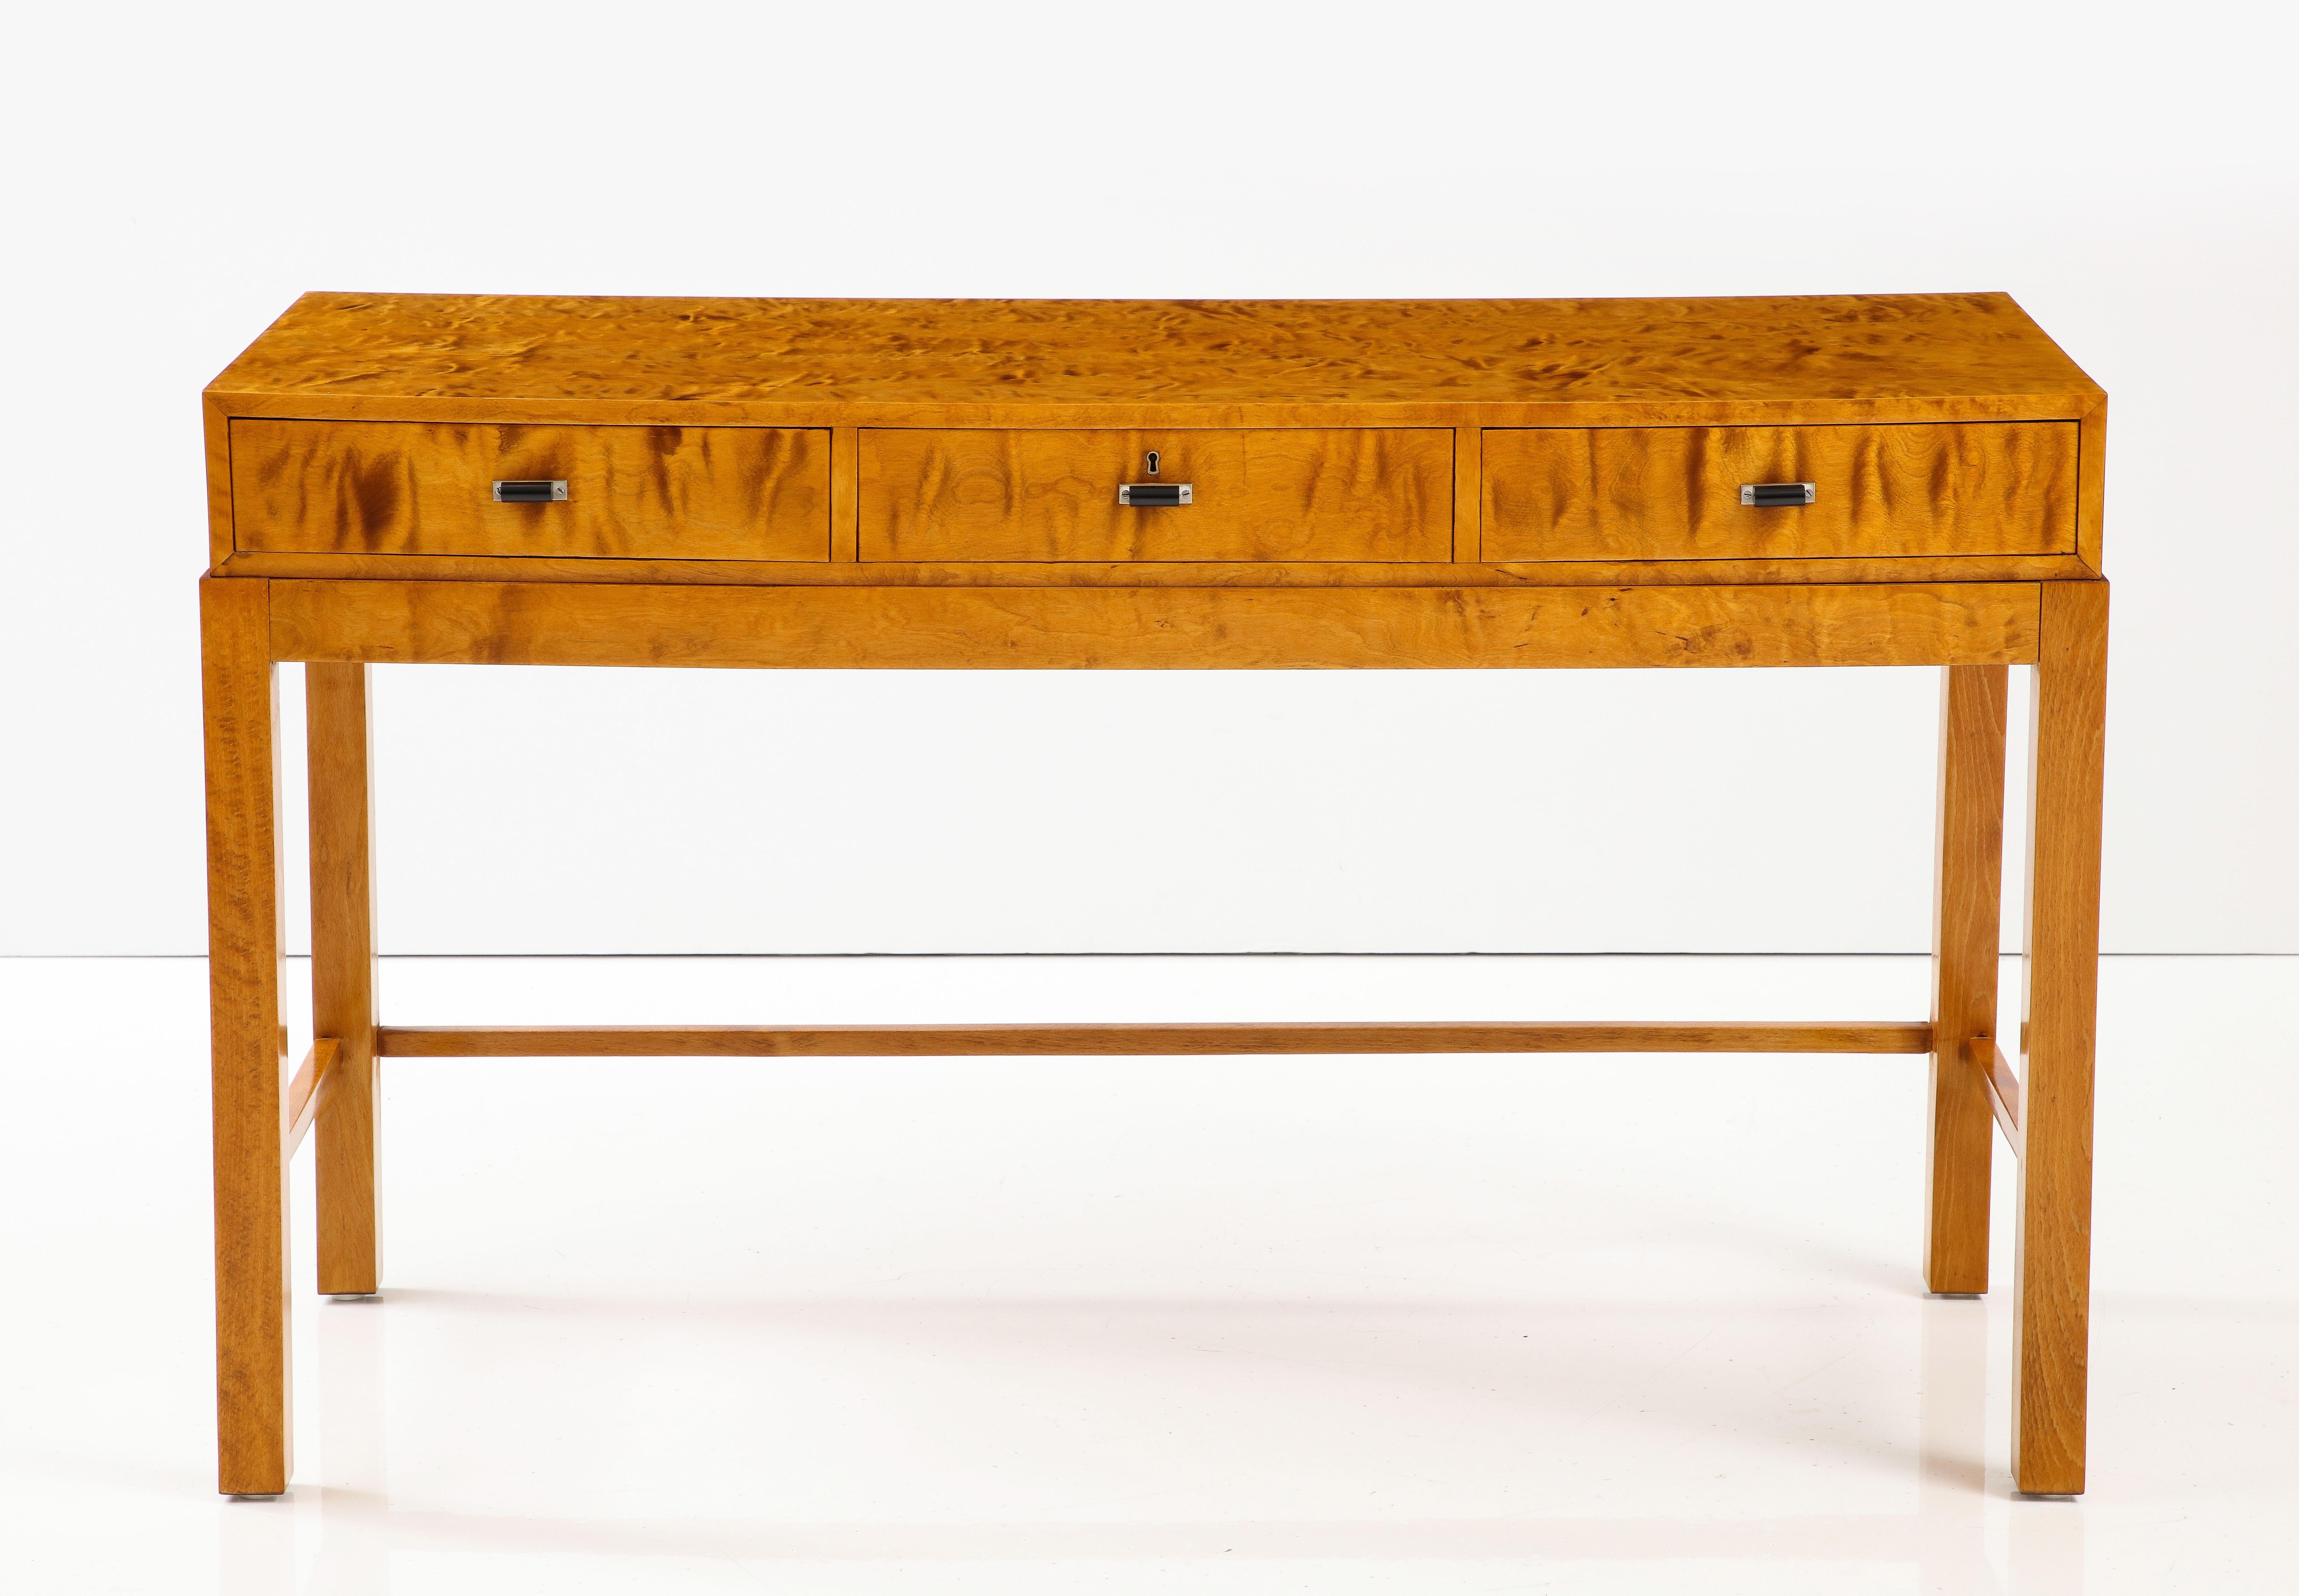 A Danish figured flamed birch console, Circa 1930-40, the rectangular top with three frieze drawers. The drawers with nickel and bakelite pulls. Raised on square legs joined by side and back cross -stretcher.